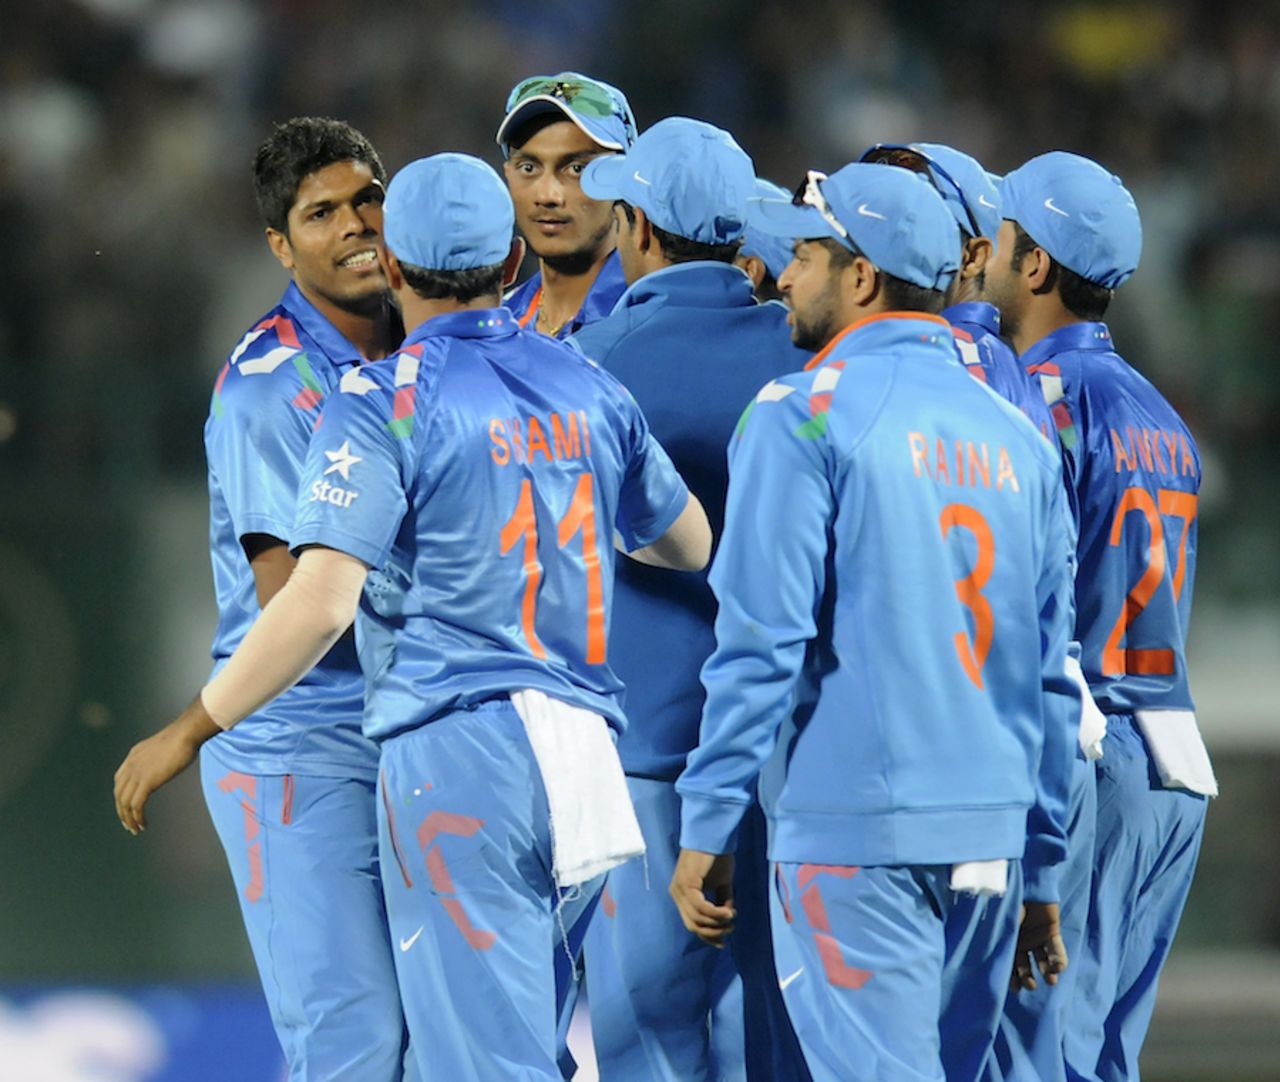 Umesh Yadav is mobbed by his teammates after the wicket of Dwayne Smith, India v West Indies, 4th ODI, Dharamsala, October 17, 2014